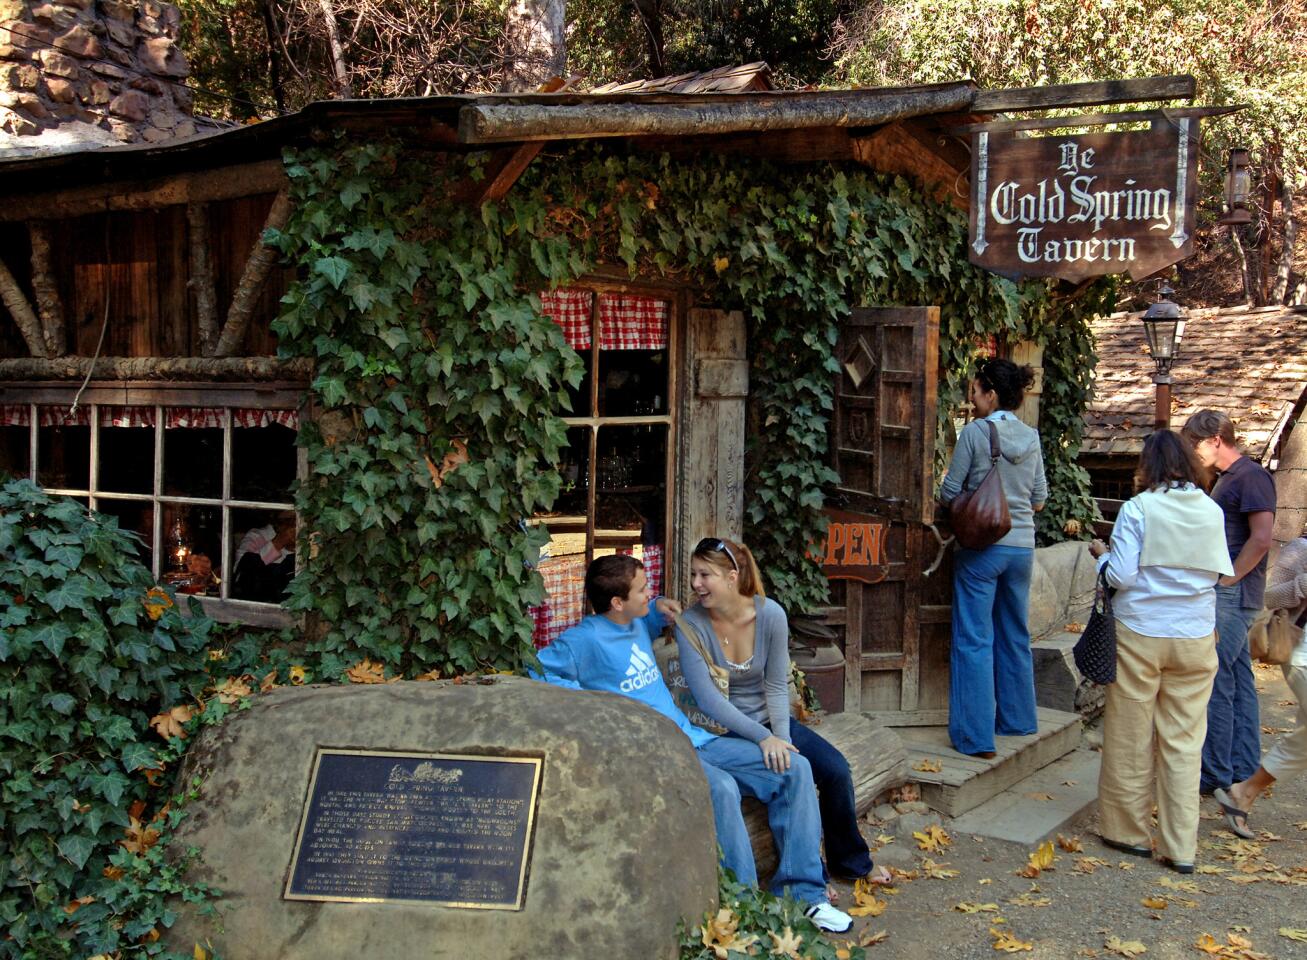 Born as a stagecoach stop in the 1880s, the Cold Spring sits in the mountains 10 miles outside Santa Barbara on California 154. Owned by the Ovington family since 1941, the property includes an upscale restaurant and a rustic bar with a massive stone fireplace at one end.